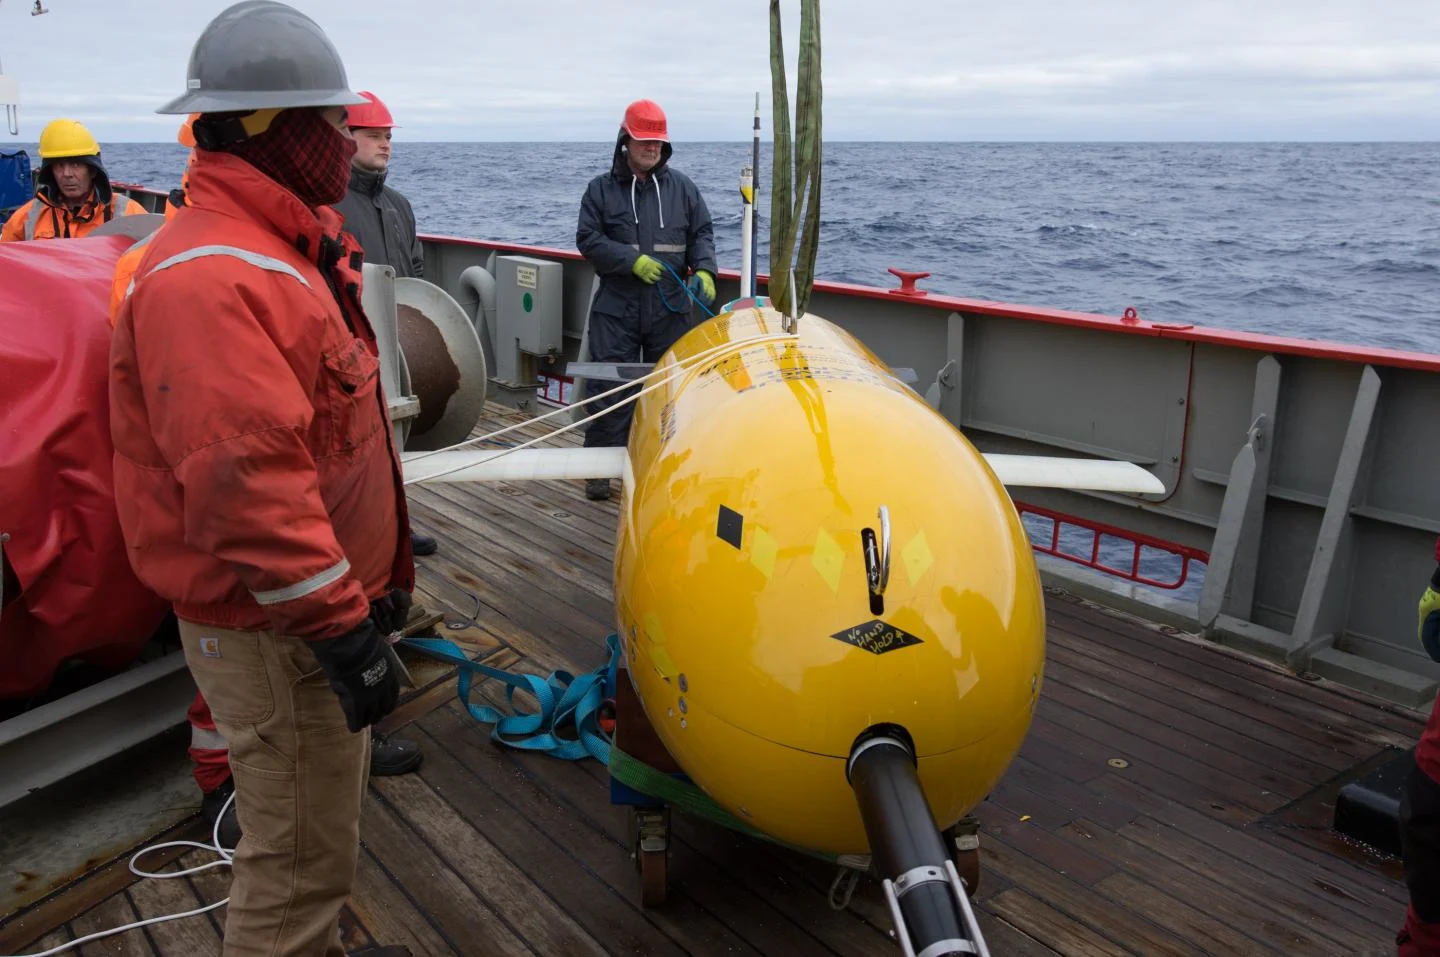 Boaty McBoatface is providing insight into warming oceans